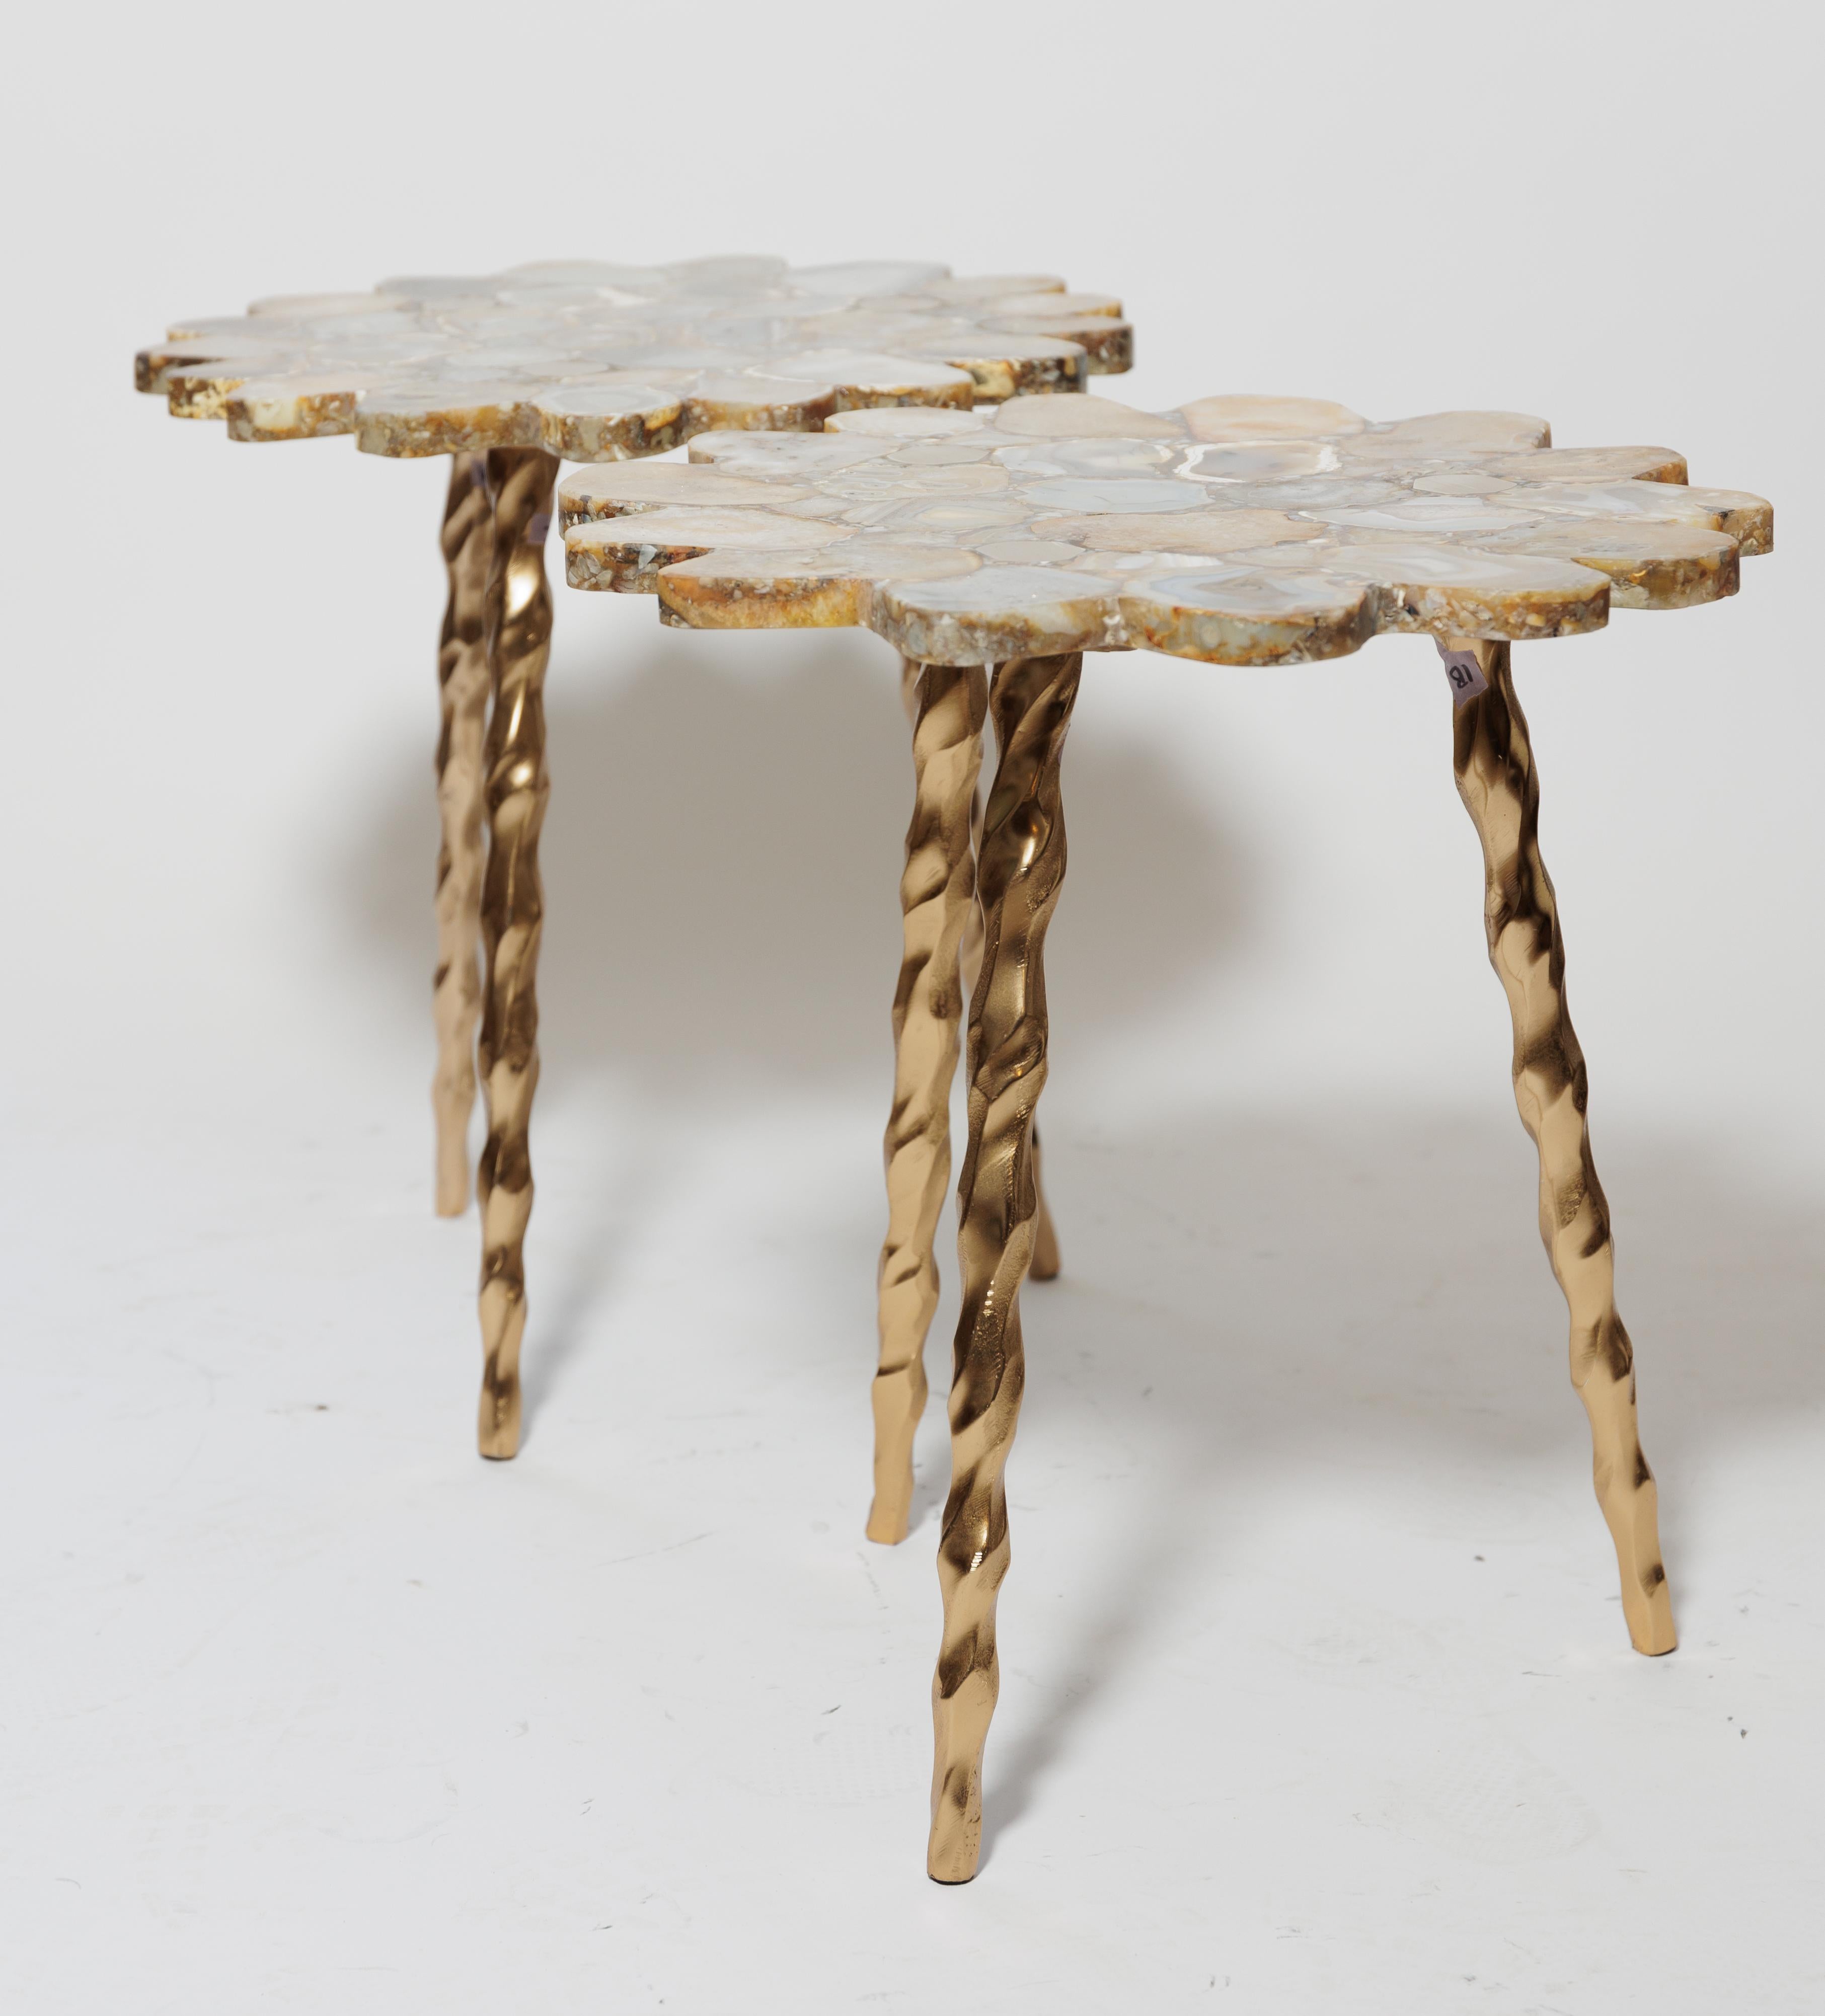 Beige Varieties of Natural Stone Top Table with Three Metal Leg Base In Excellent Condition For Sale In Bridgehampton, NY